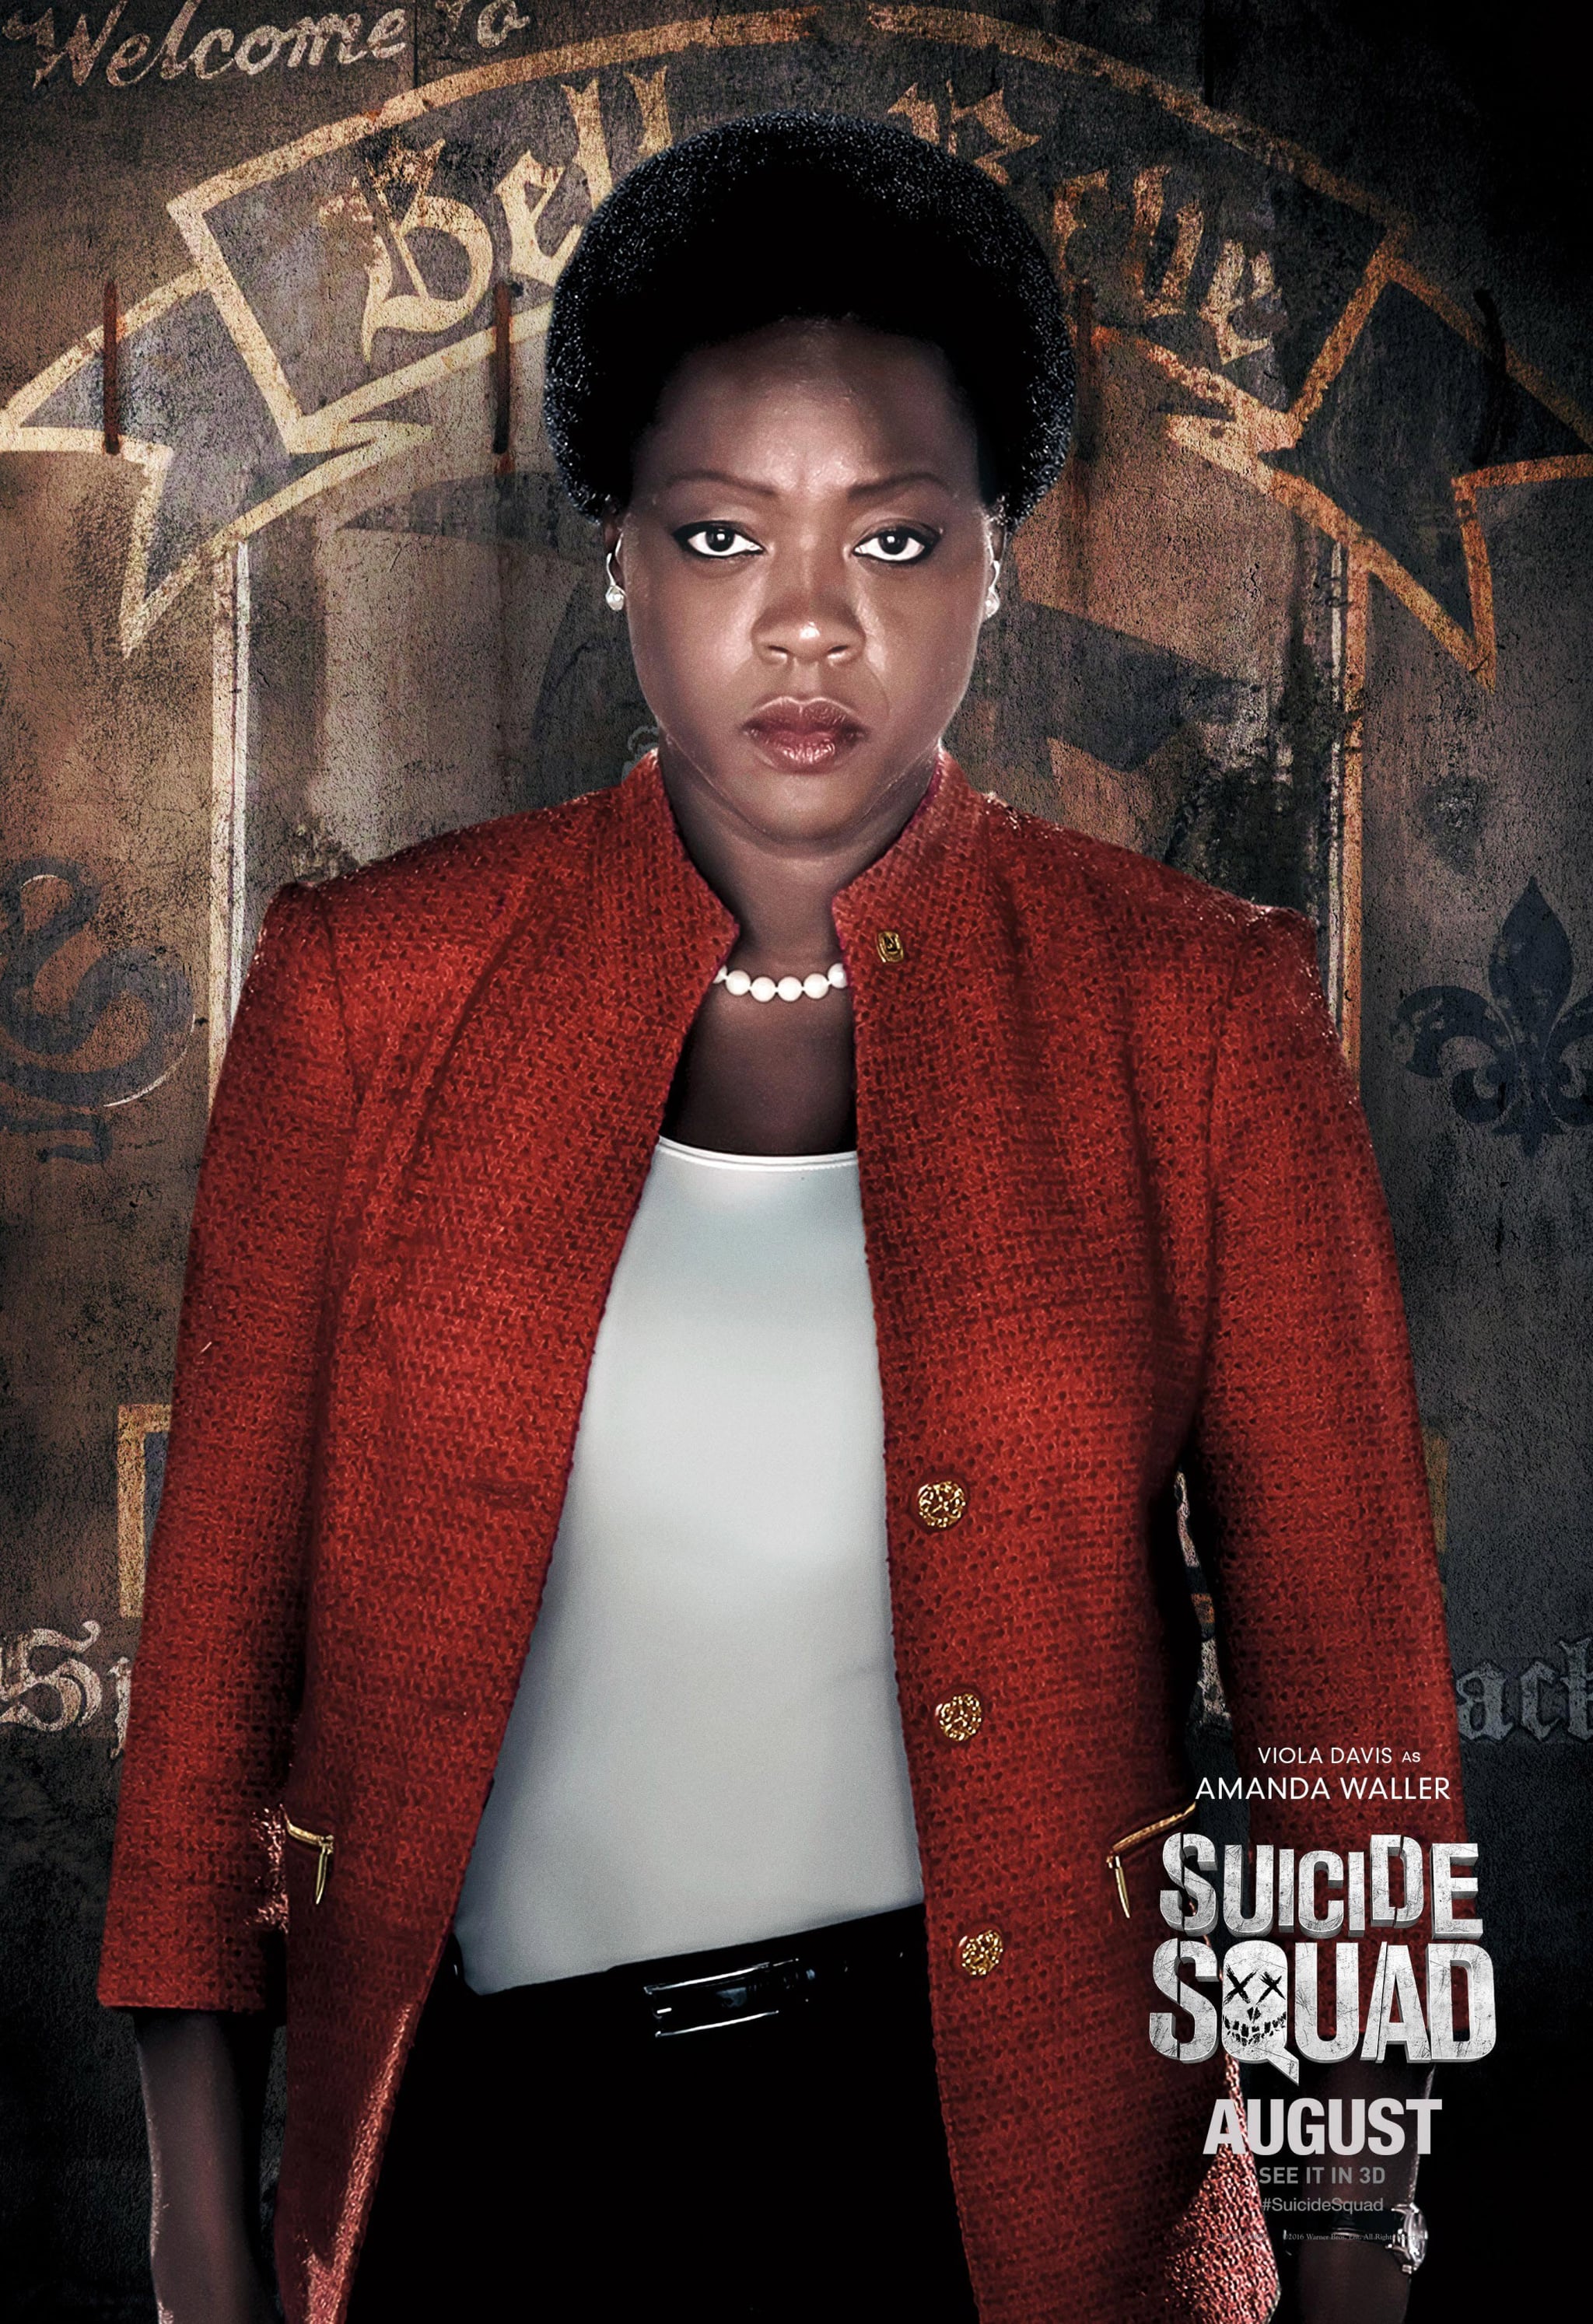 Amanda-Waller-From-Suicide-Squad.JPG